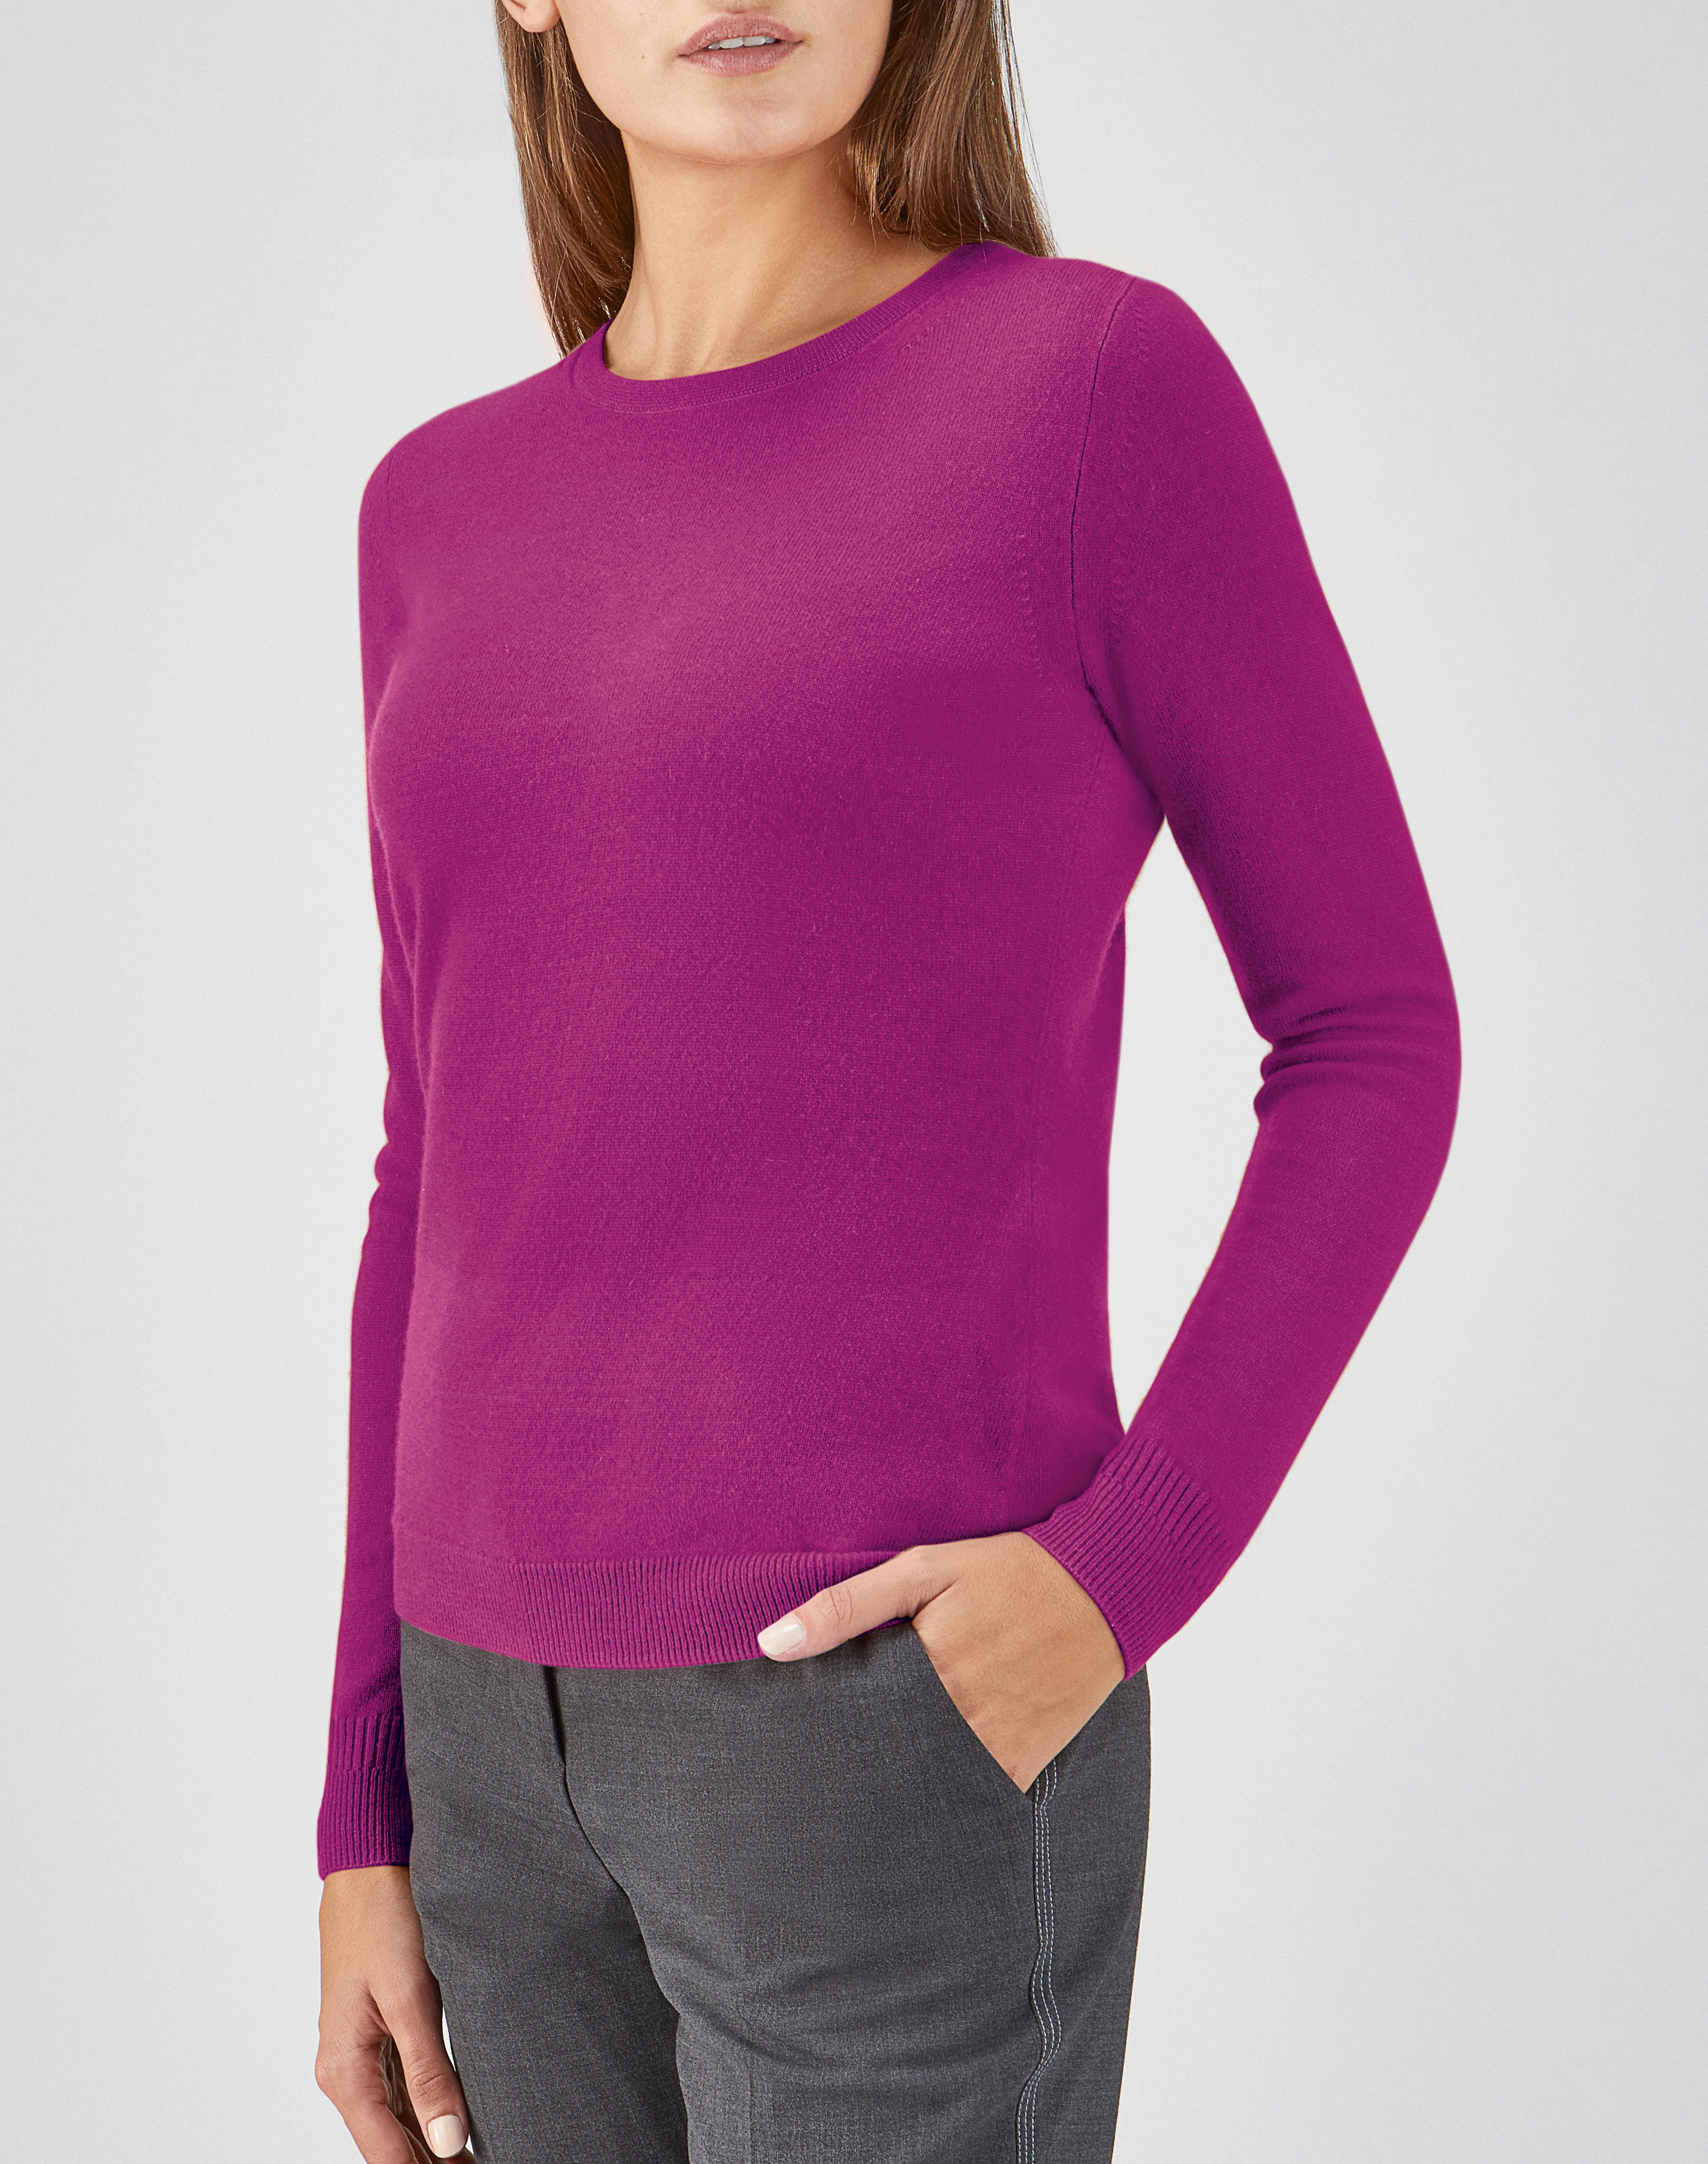 Vivid Magenta | Cashmere Straight Fit Crew Neck Sweater | Pure Collection